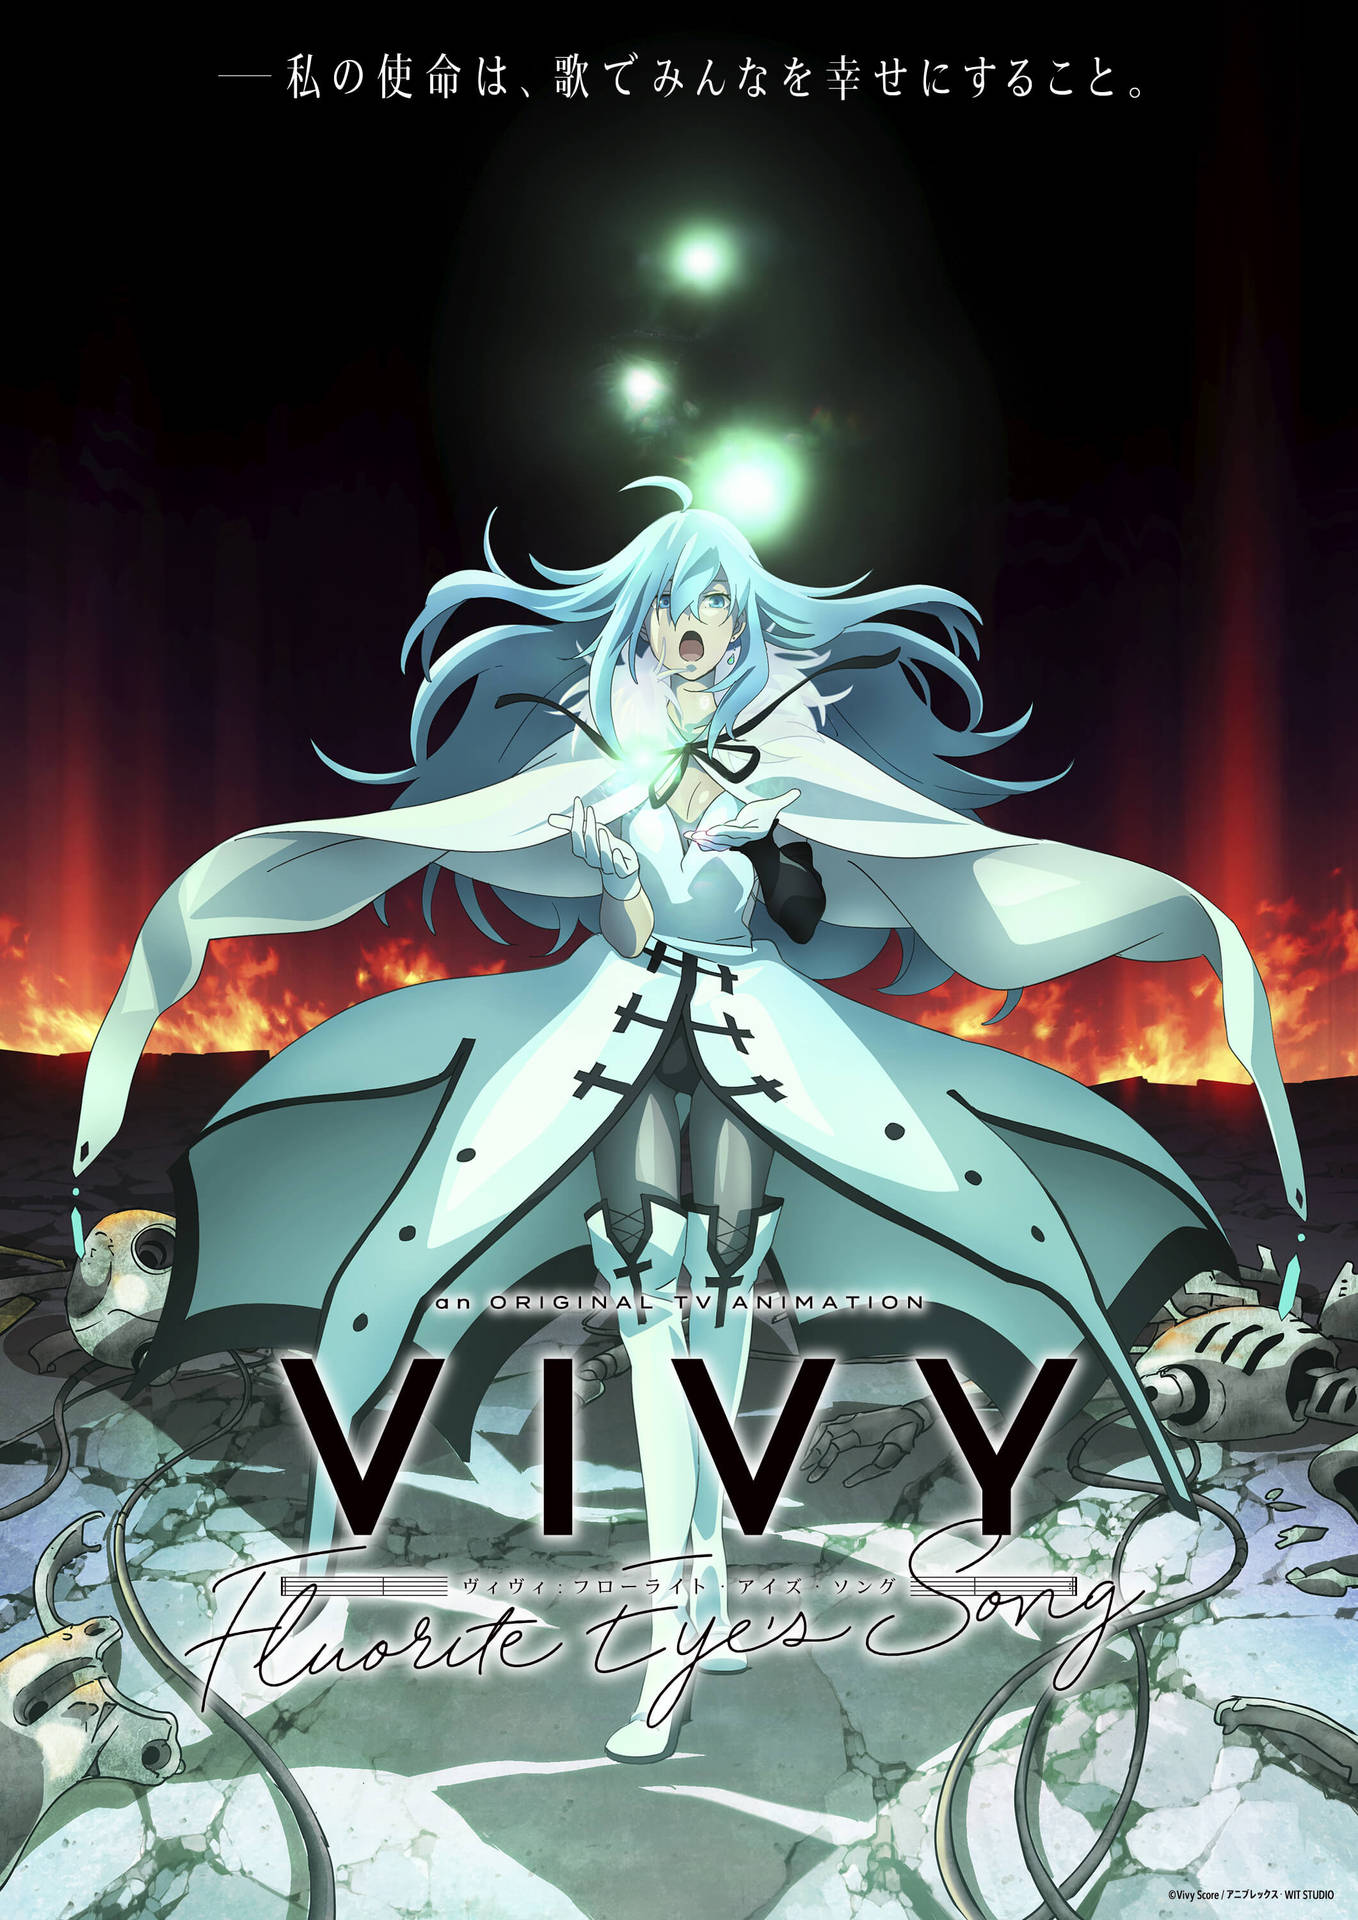 Have A Great Time With Vivy, A Virtual Idol And Artificial Intelligence!